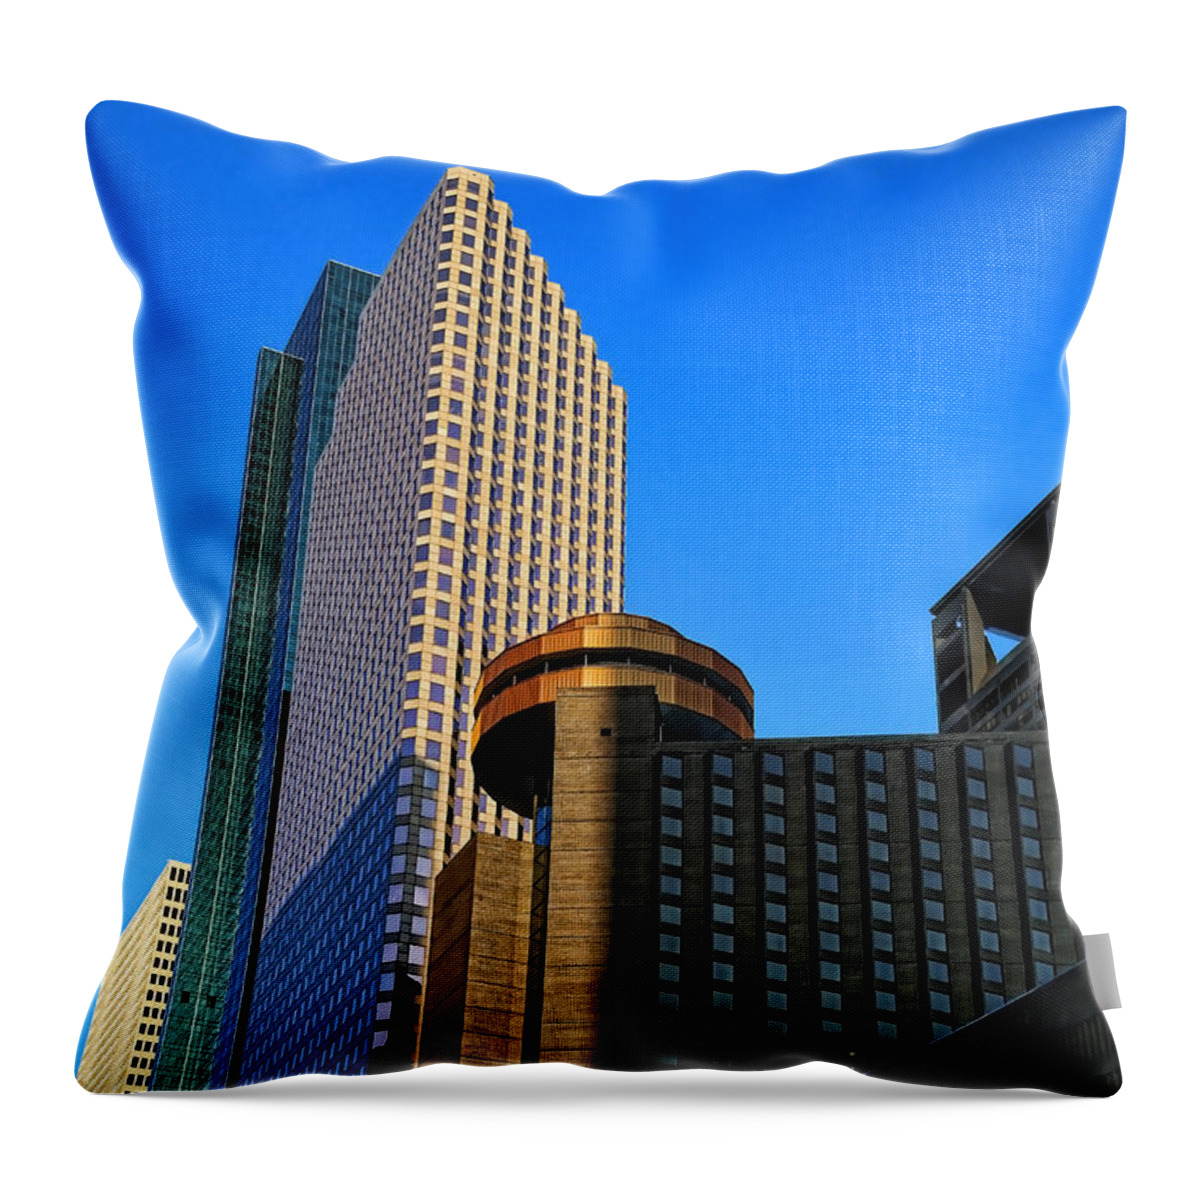 Houston Throw Pillow featuring the photograph Houston Buildings by Judy Vincent